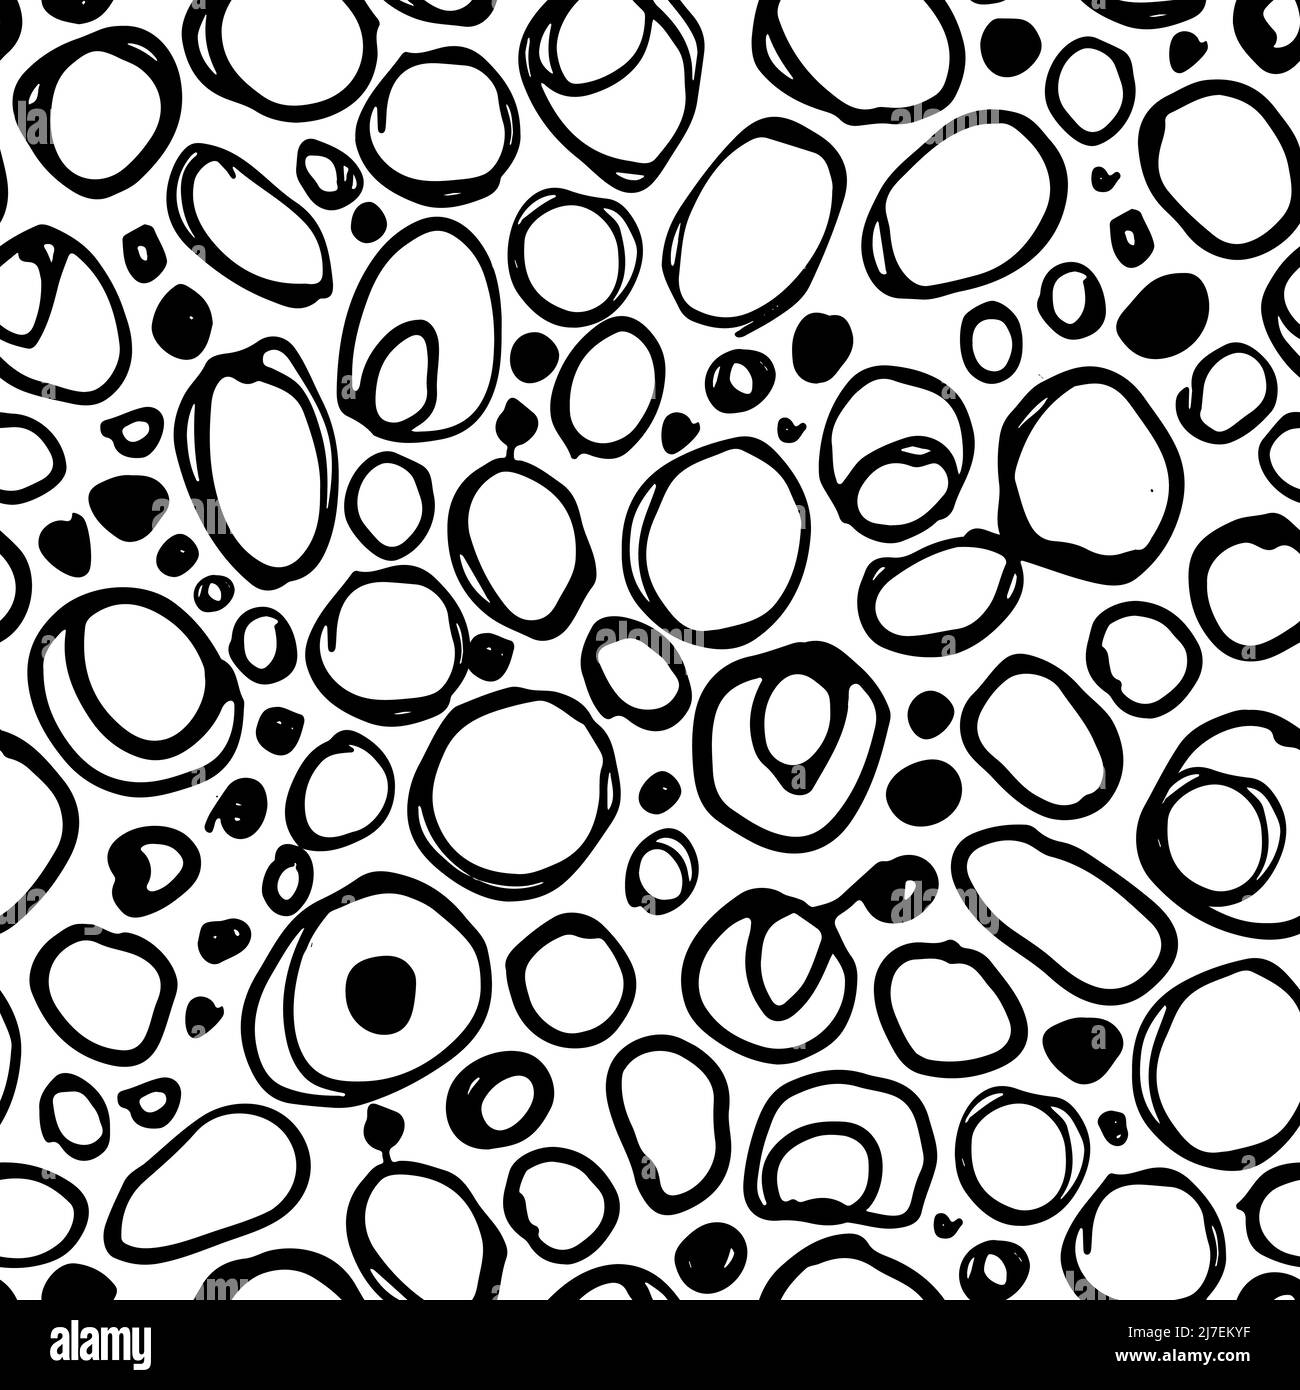 Bubbles black and white vector seamless pattern Stock Vector Image ...